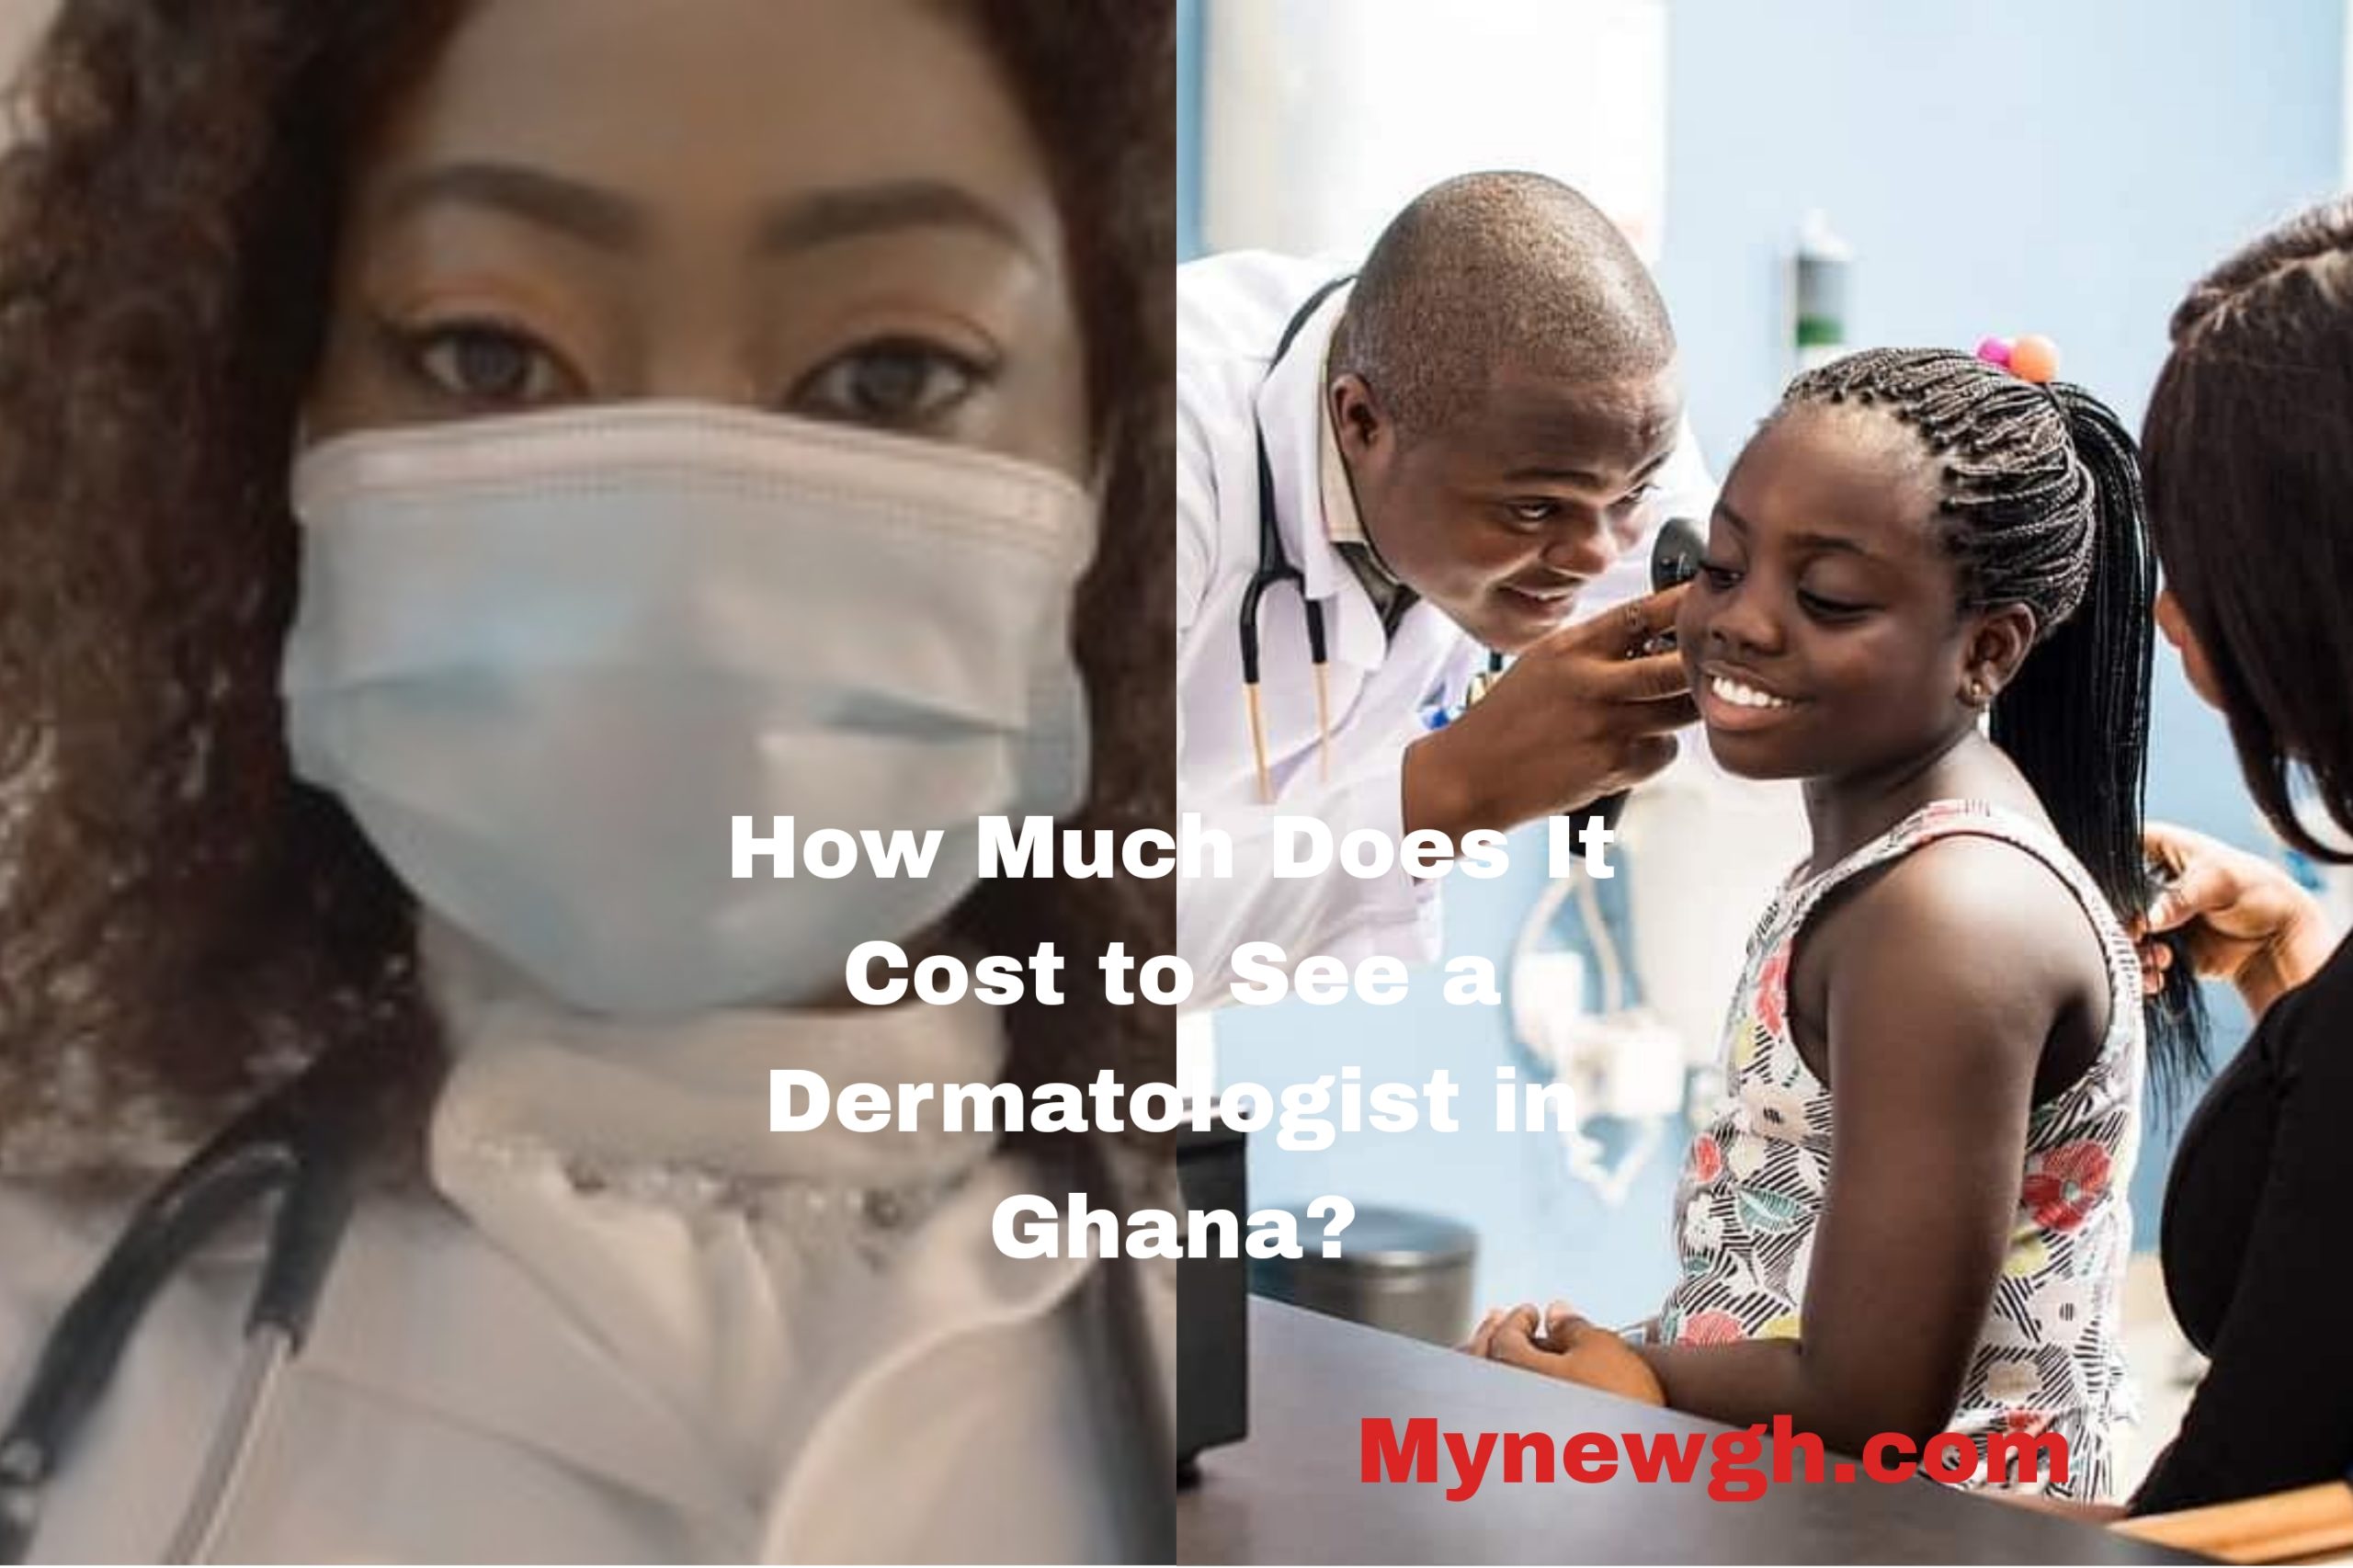 How Much Does It Cost to See a Dermatologist in Ghana? - Detailed Answer